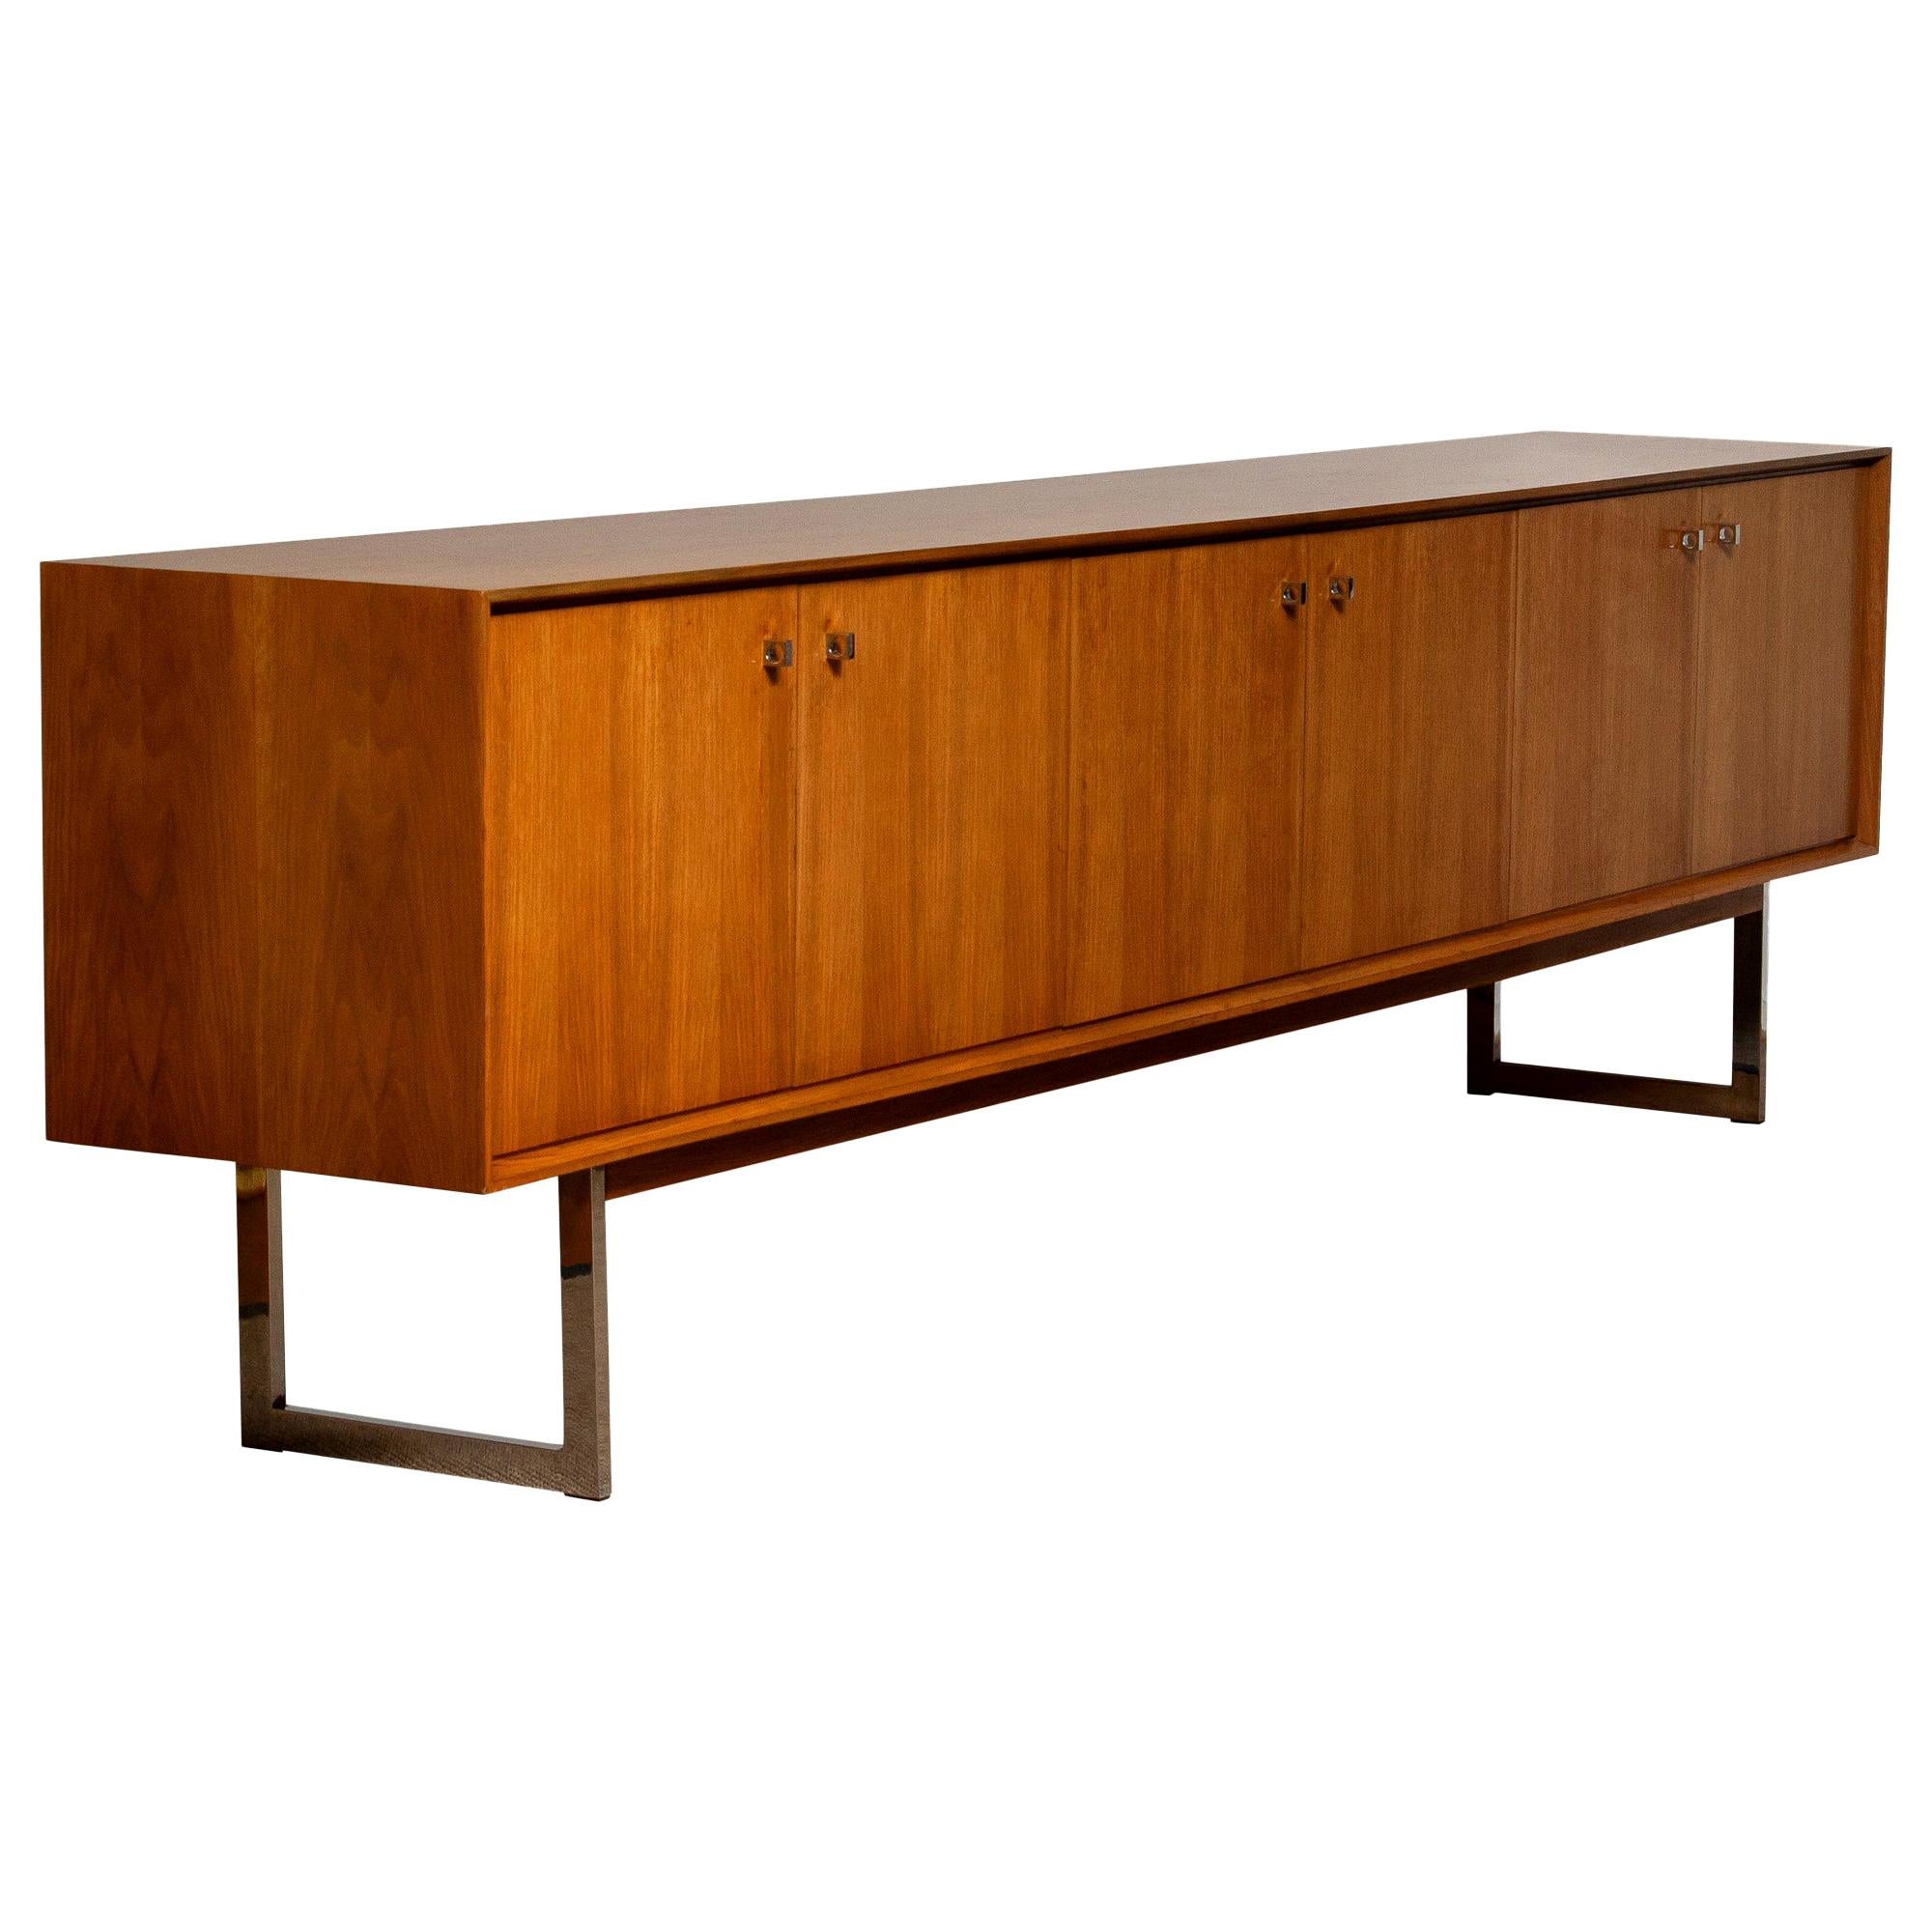 Extreme beautiful and extra wide credenzas / sideboard, 118 inches, in walnut on chrome legs.
It's a great quality piece and the overall condition is very good!
 